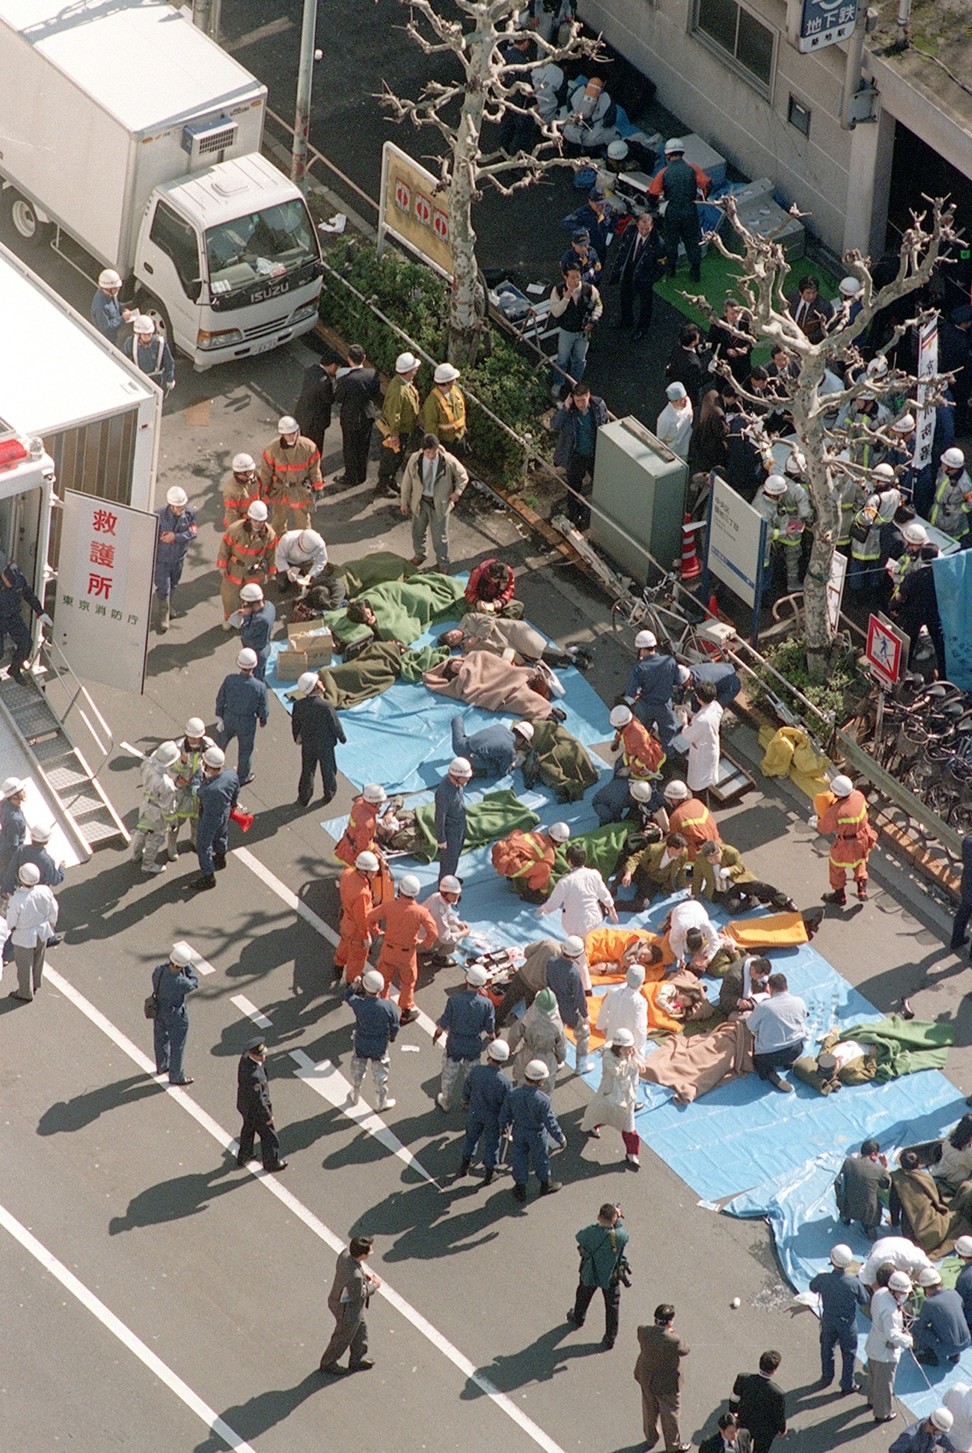 In 1995, subway passengers affected by sarin nerve gas were treated near Tsukiji subway station in Tokyo. Photo: Kyodo